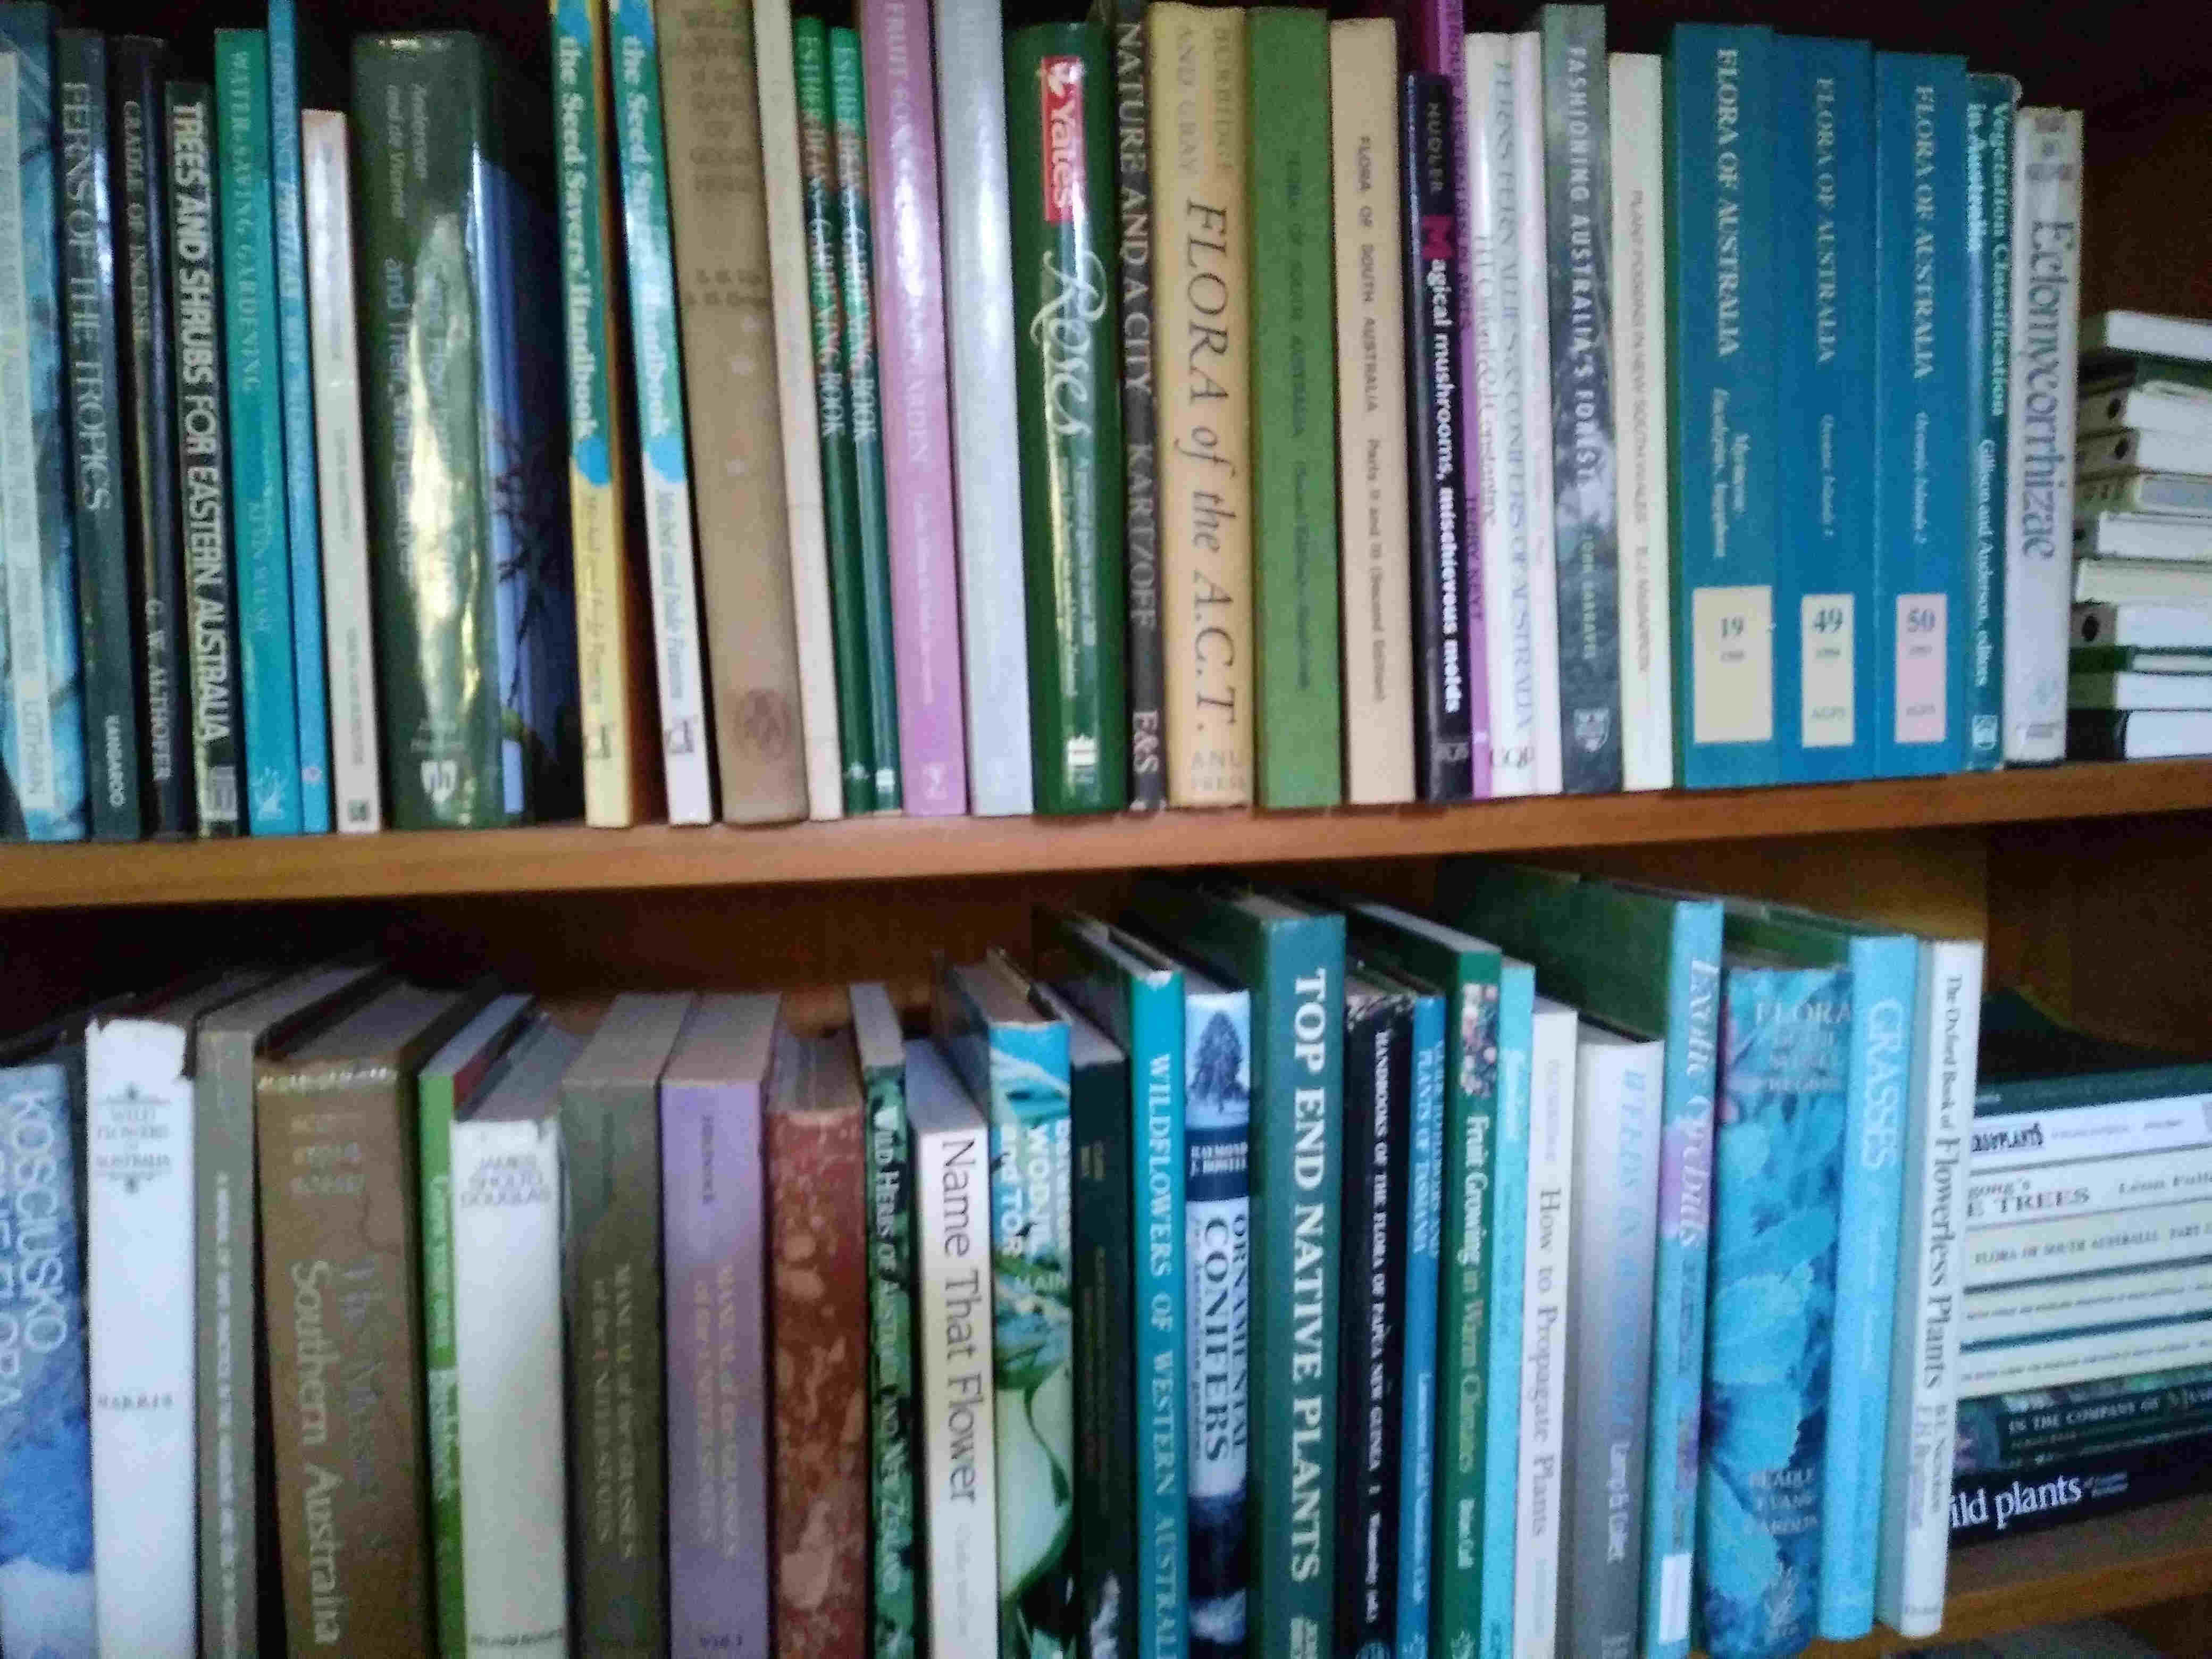 Farming Agriculture Self-Sufficiency Books used second hand out of print farming agriculture animal husbandry Bill Mollison permaculture forestry poultrykeeping horticulture self-sufficiency books for sale in Australian second hand book shop